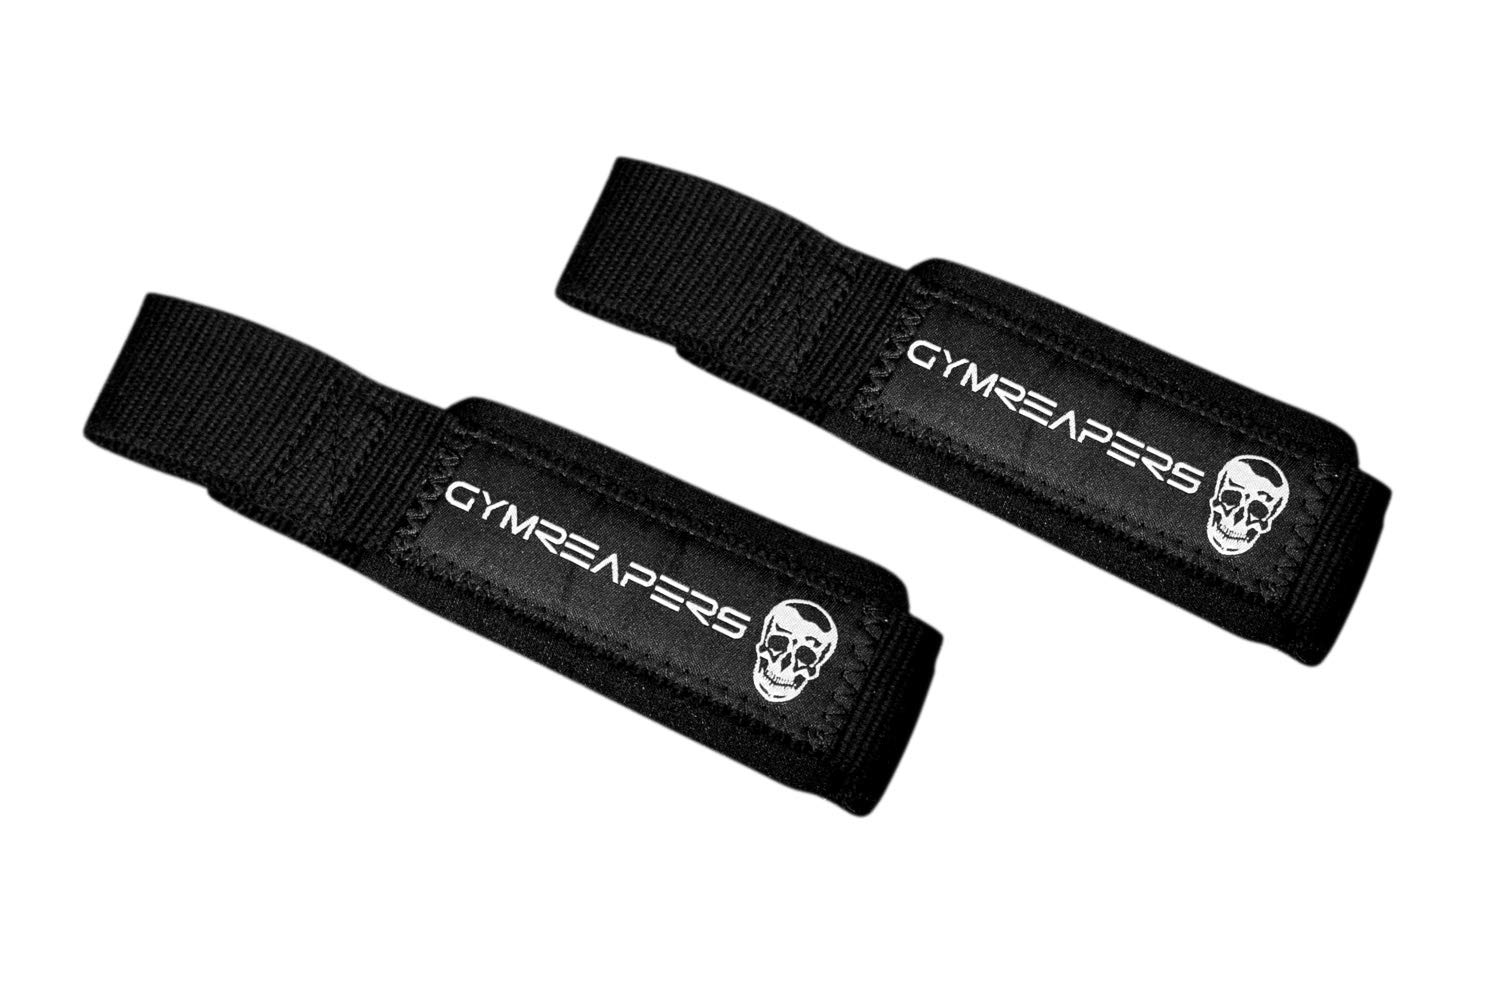 The Fitness Valley Gymreapers Lifting Wrist Straps for Weightlifting